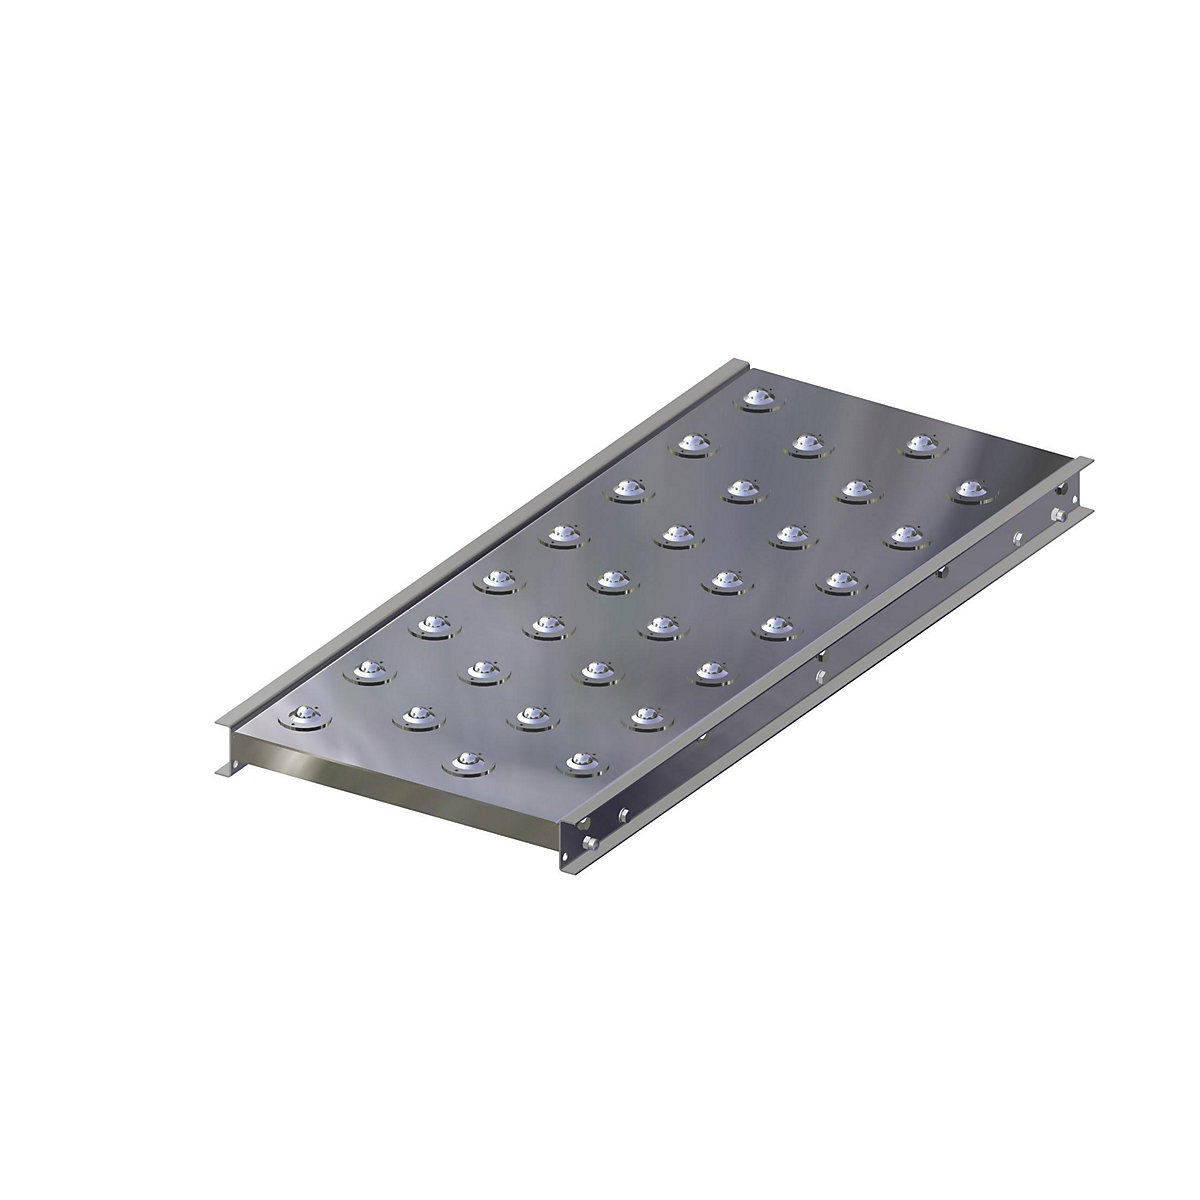 Gura – Ball unit table, track width 400 mm, length 1000 mm, division 125 mm